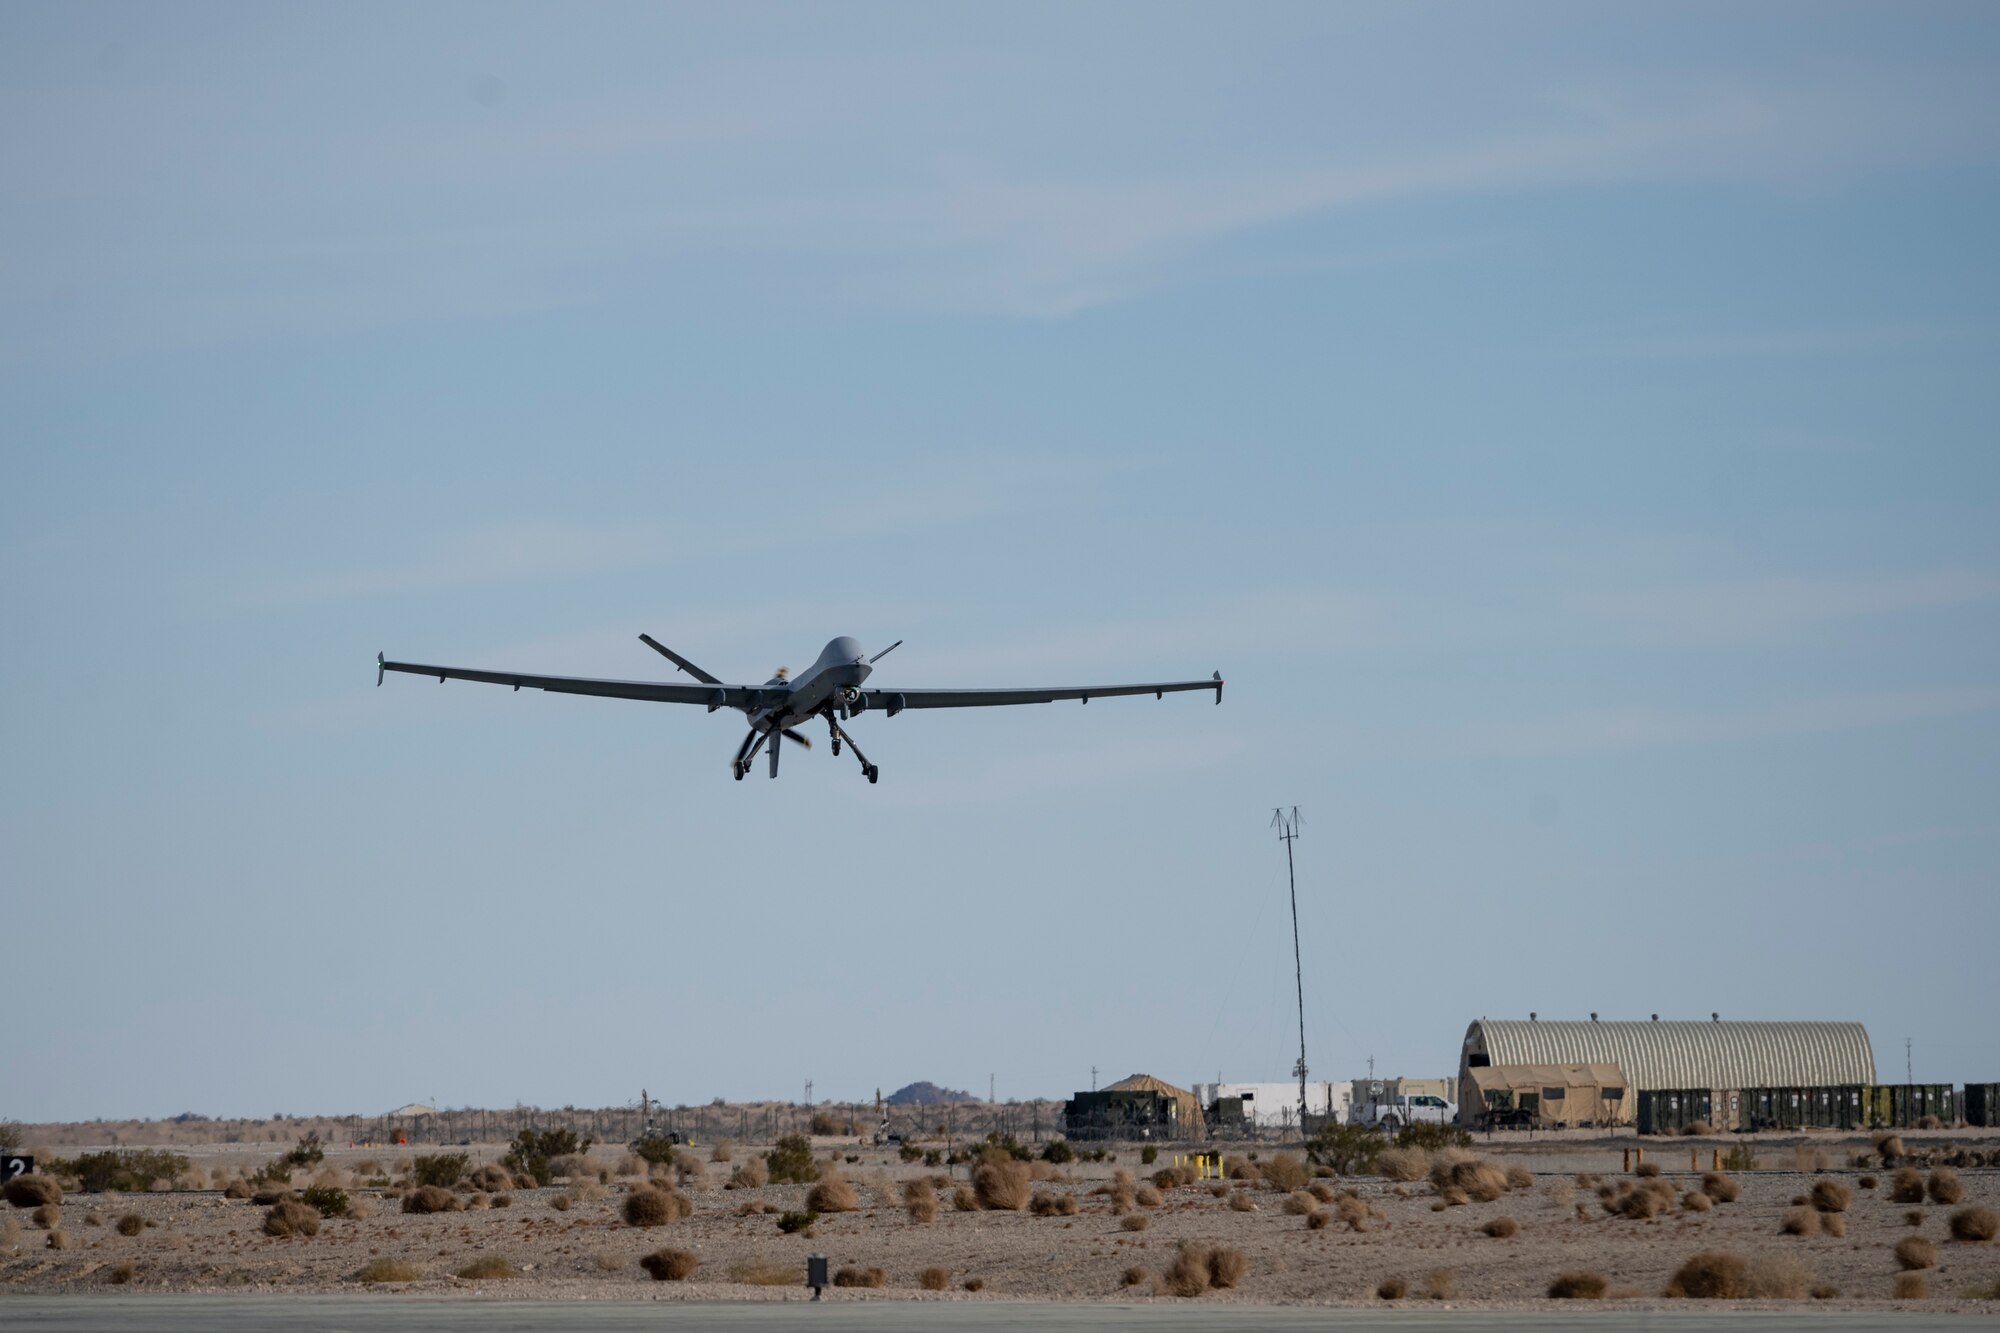 An MQ-9 Reaper assigned to the 49th Wing takes off from a runway at Marine Corps Air Ground Combat Command Center, Twentynine Palms, California, Feb. 16, 2023. This was Holloman Air Force Base’s first Agile Combat Employment launch and recovery operation with a Portable Aircraft Control Station. (U.S. Air Force photo by Staff Sgt. Kristin West)